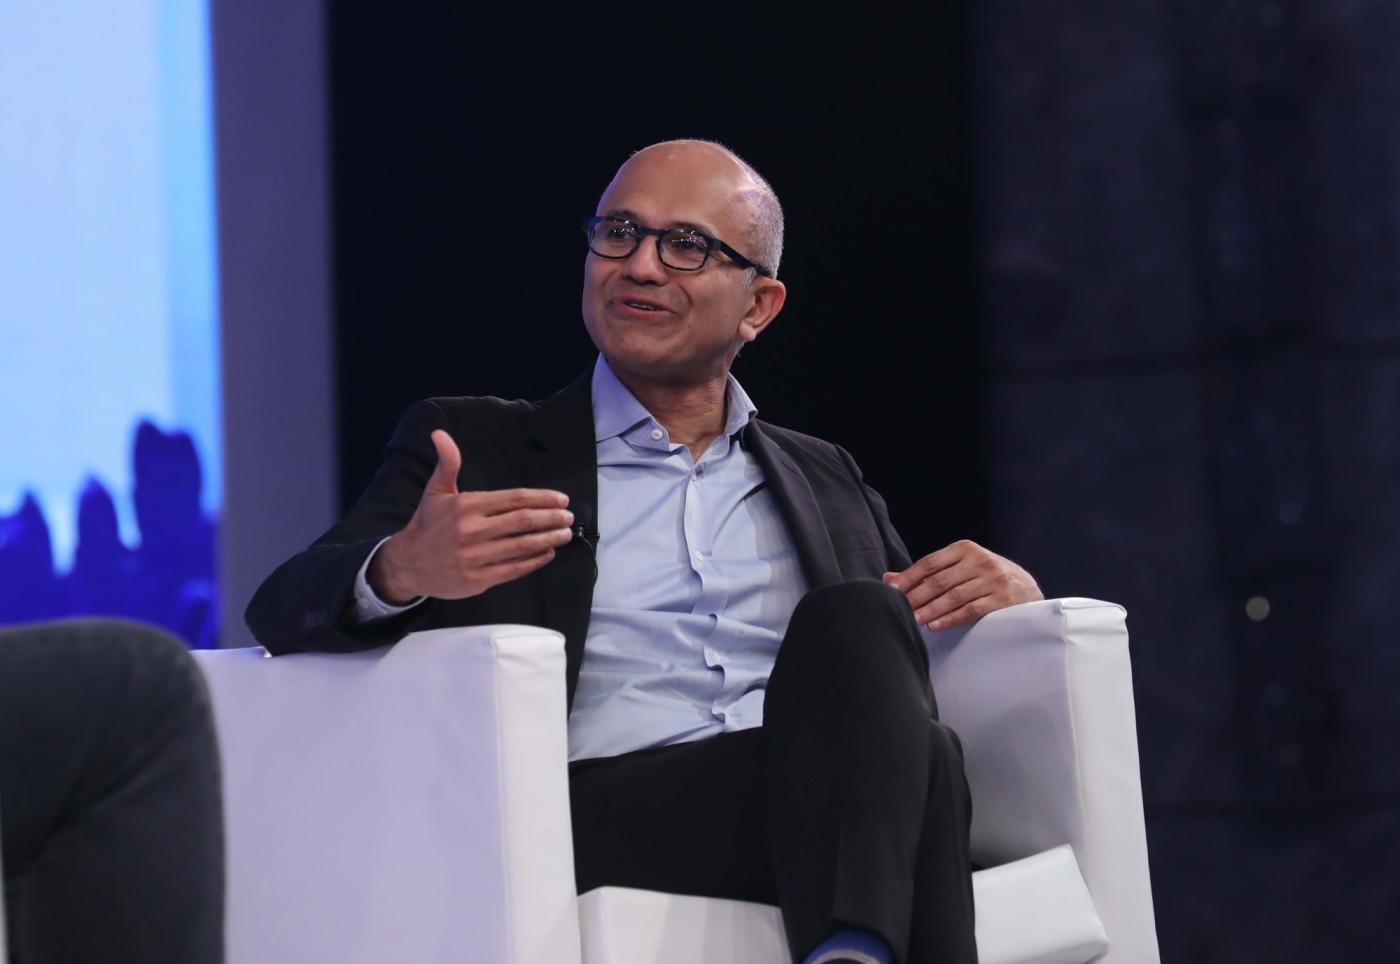 New Delhi: Microsoft CEO Satya Nadella during the launch of his book 'Hit Refresh' in New Delhi on Nov 7, 2017. (Photo: IANS) by . 